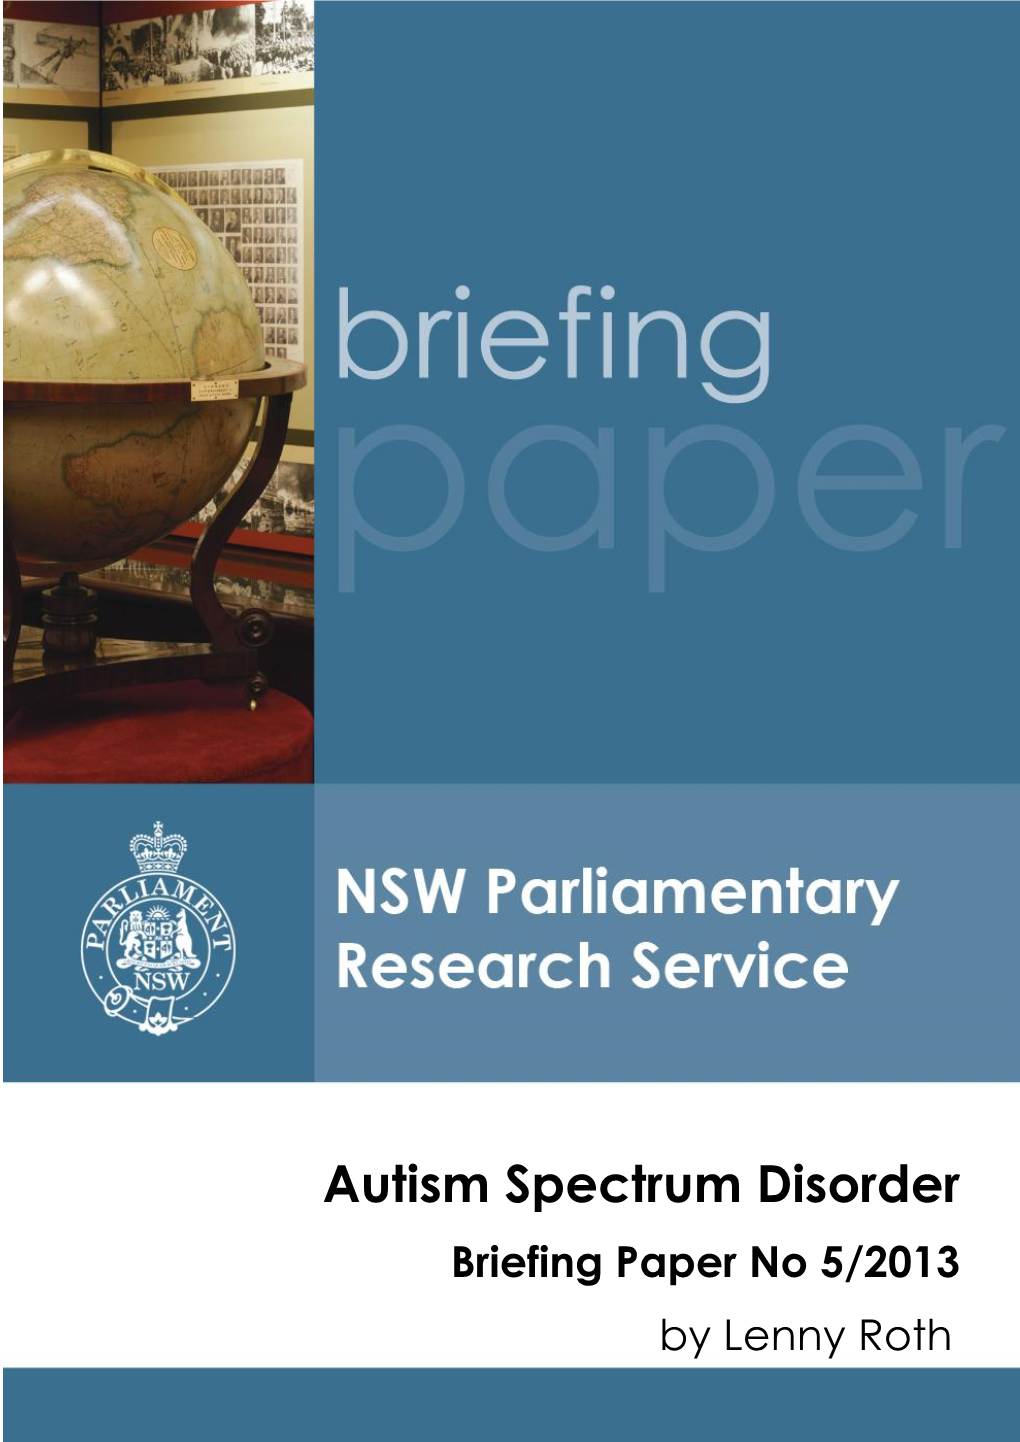 Autism Spectrum Disorder Briefing Paper No 5/2013 by Lenny Roth